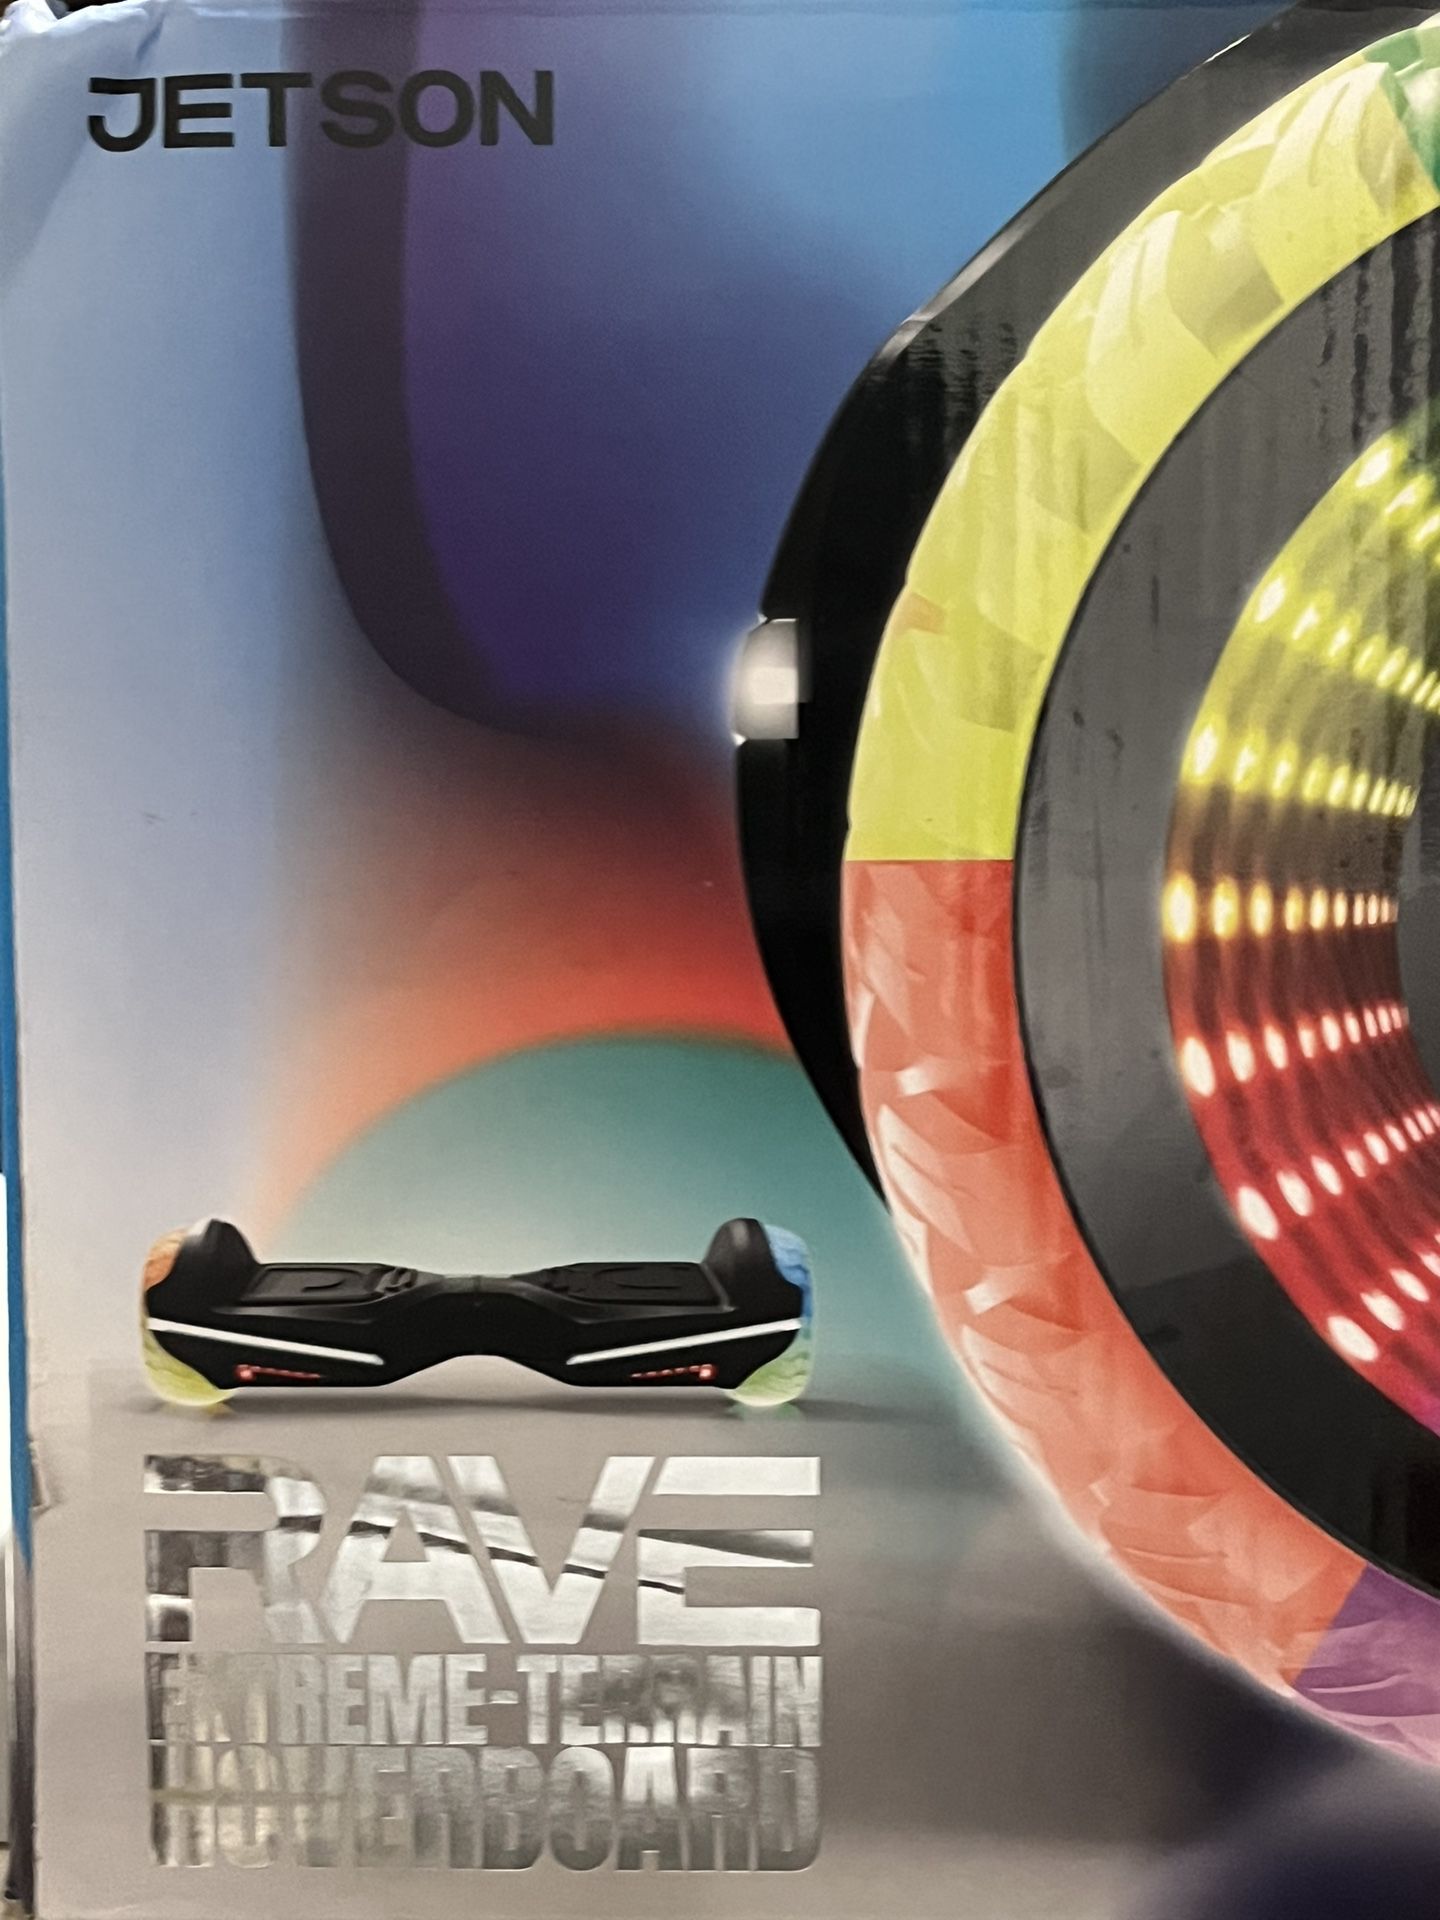 Offer For Rave Extreme-Terrain Hoverboard